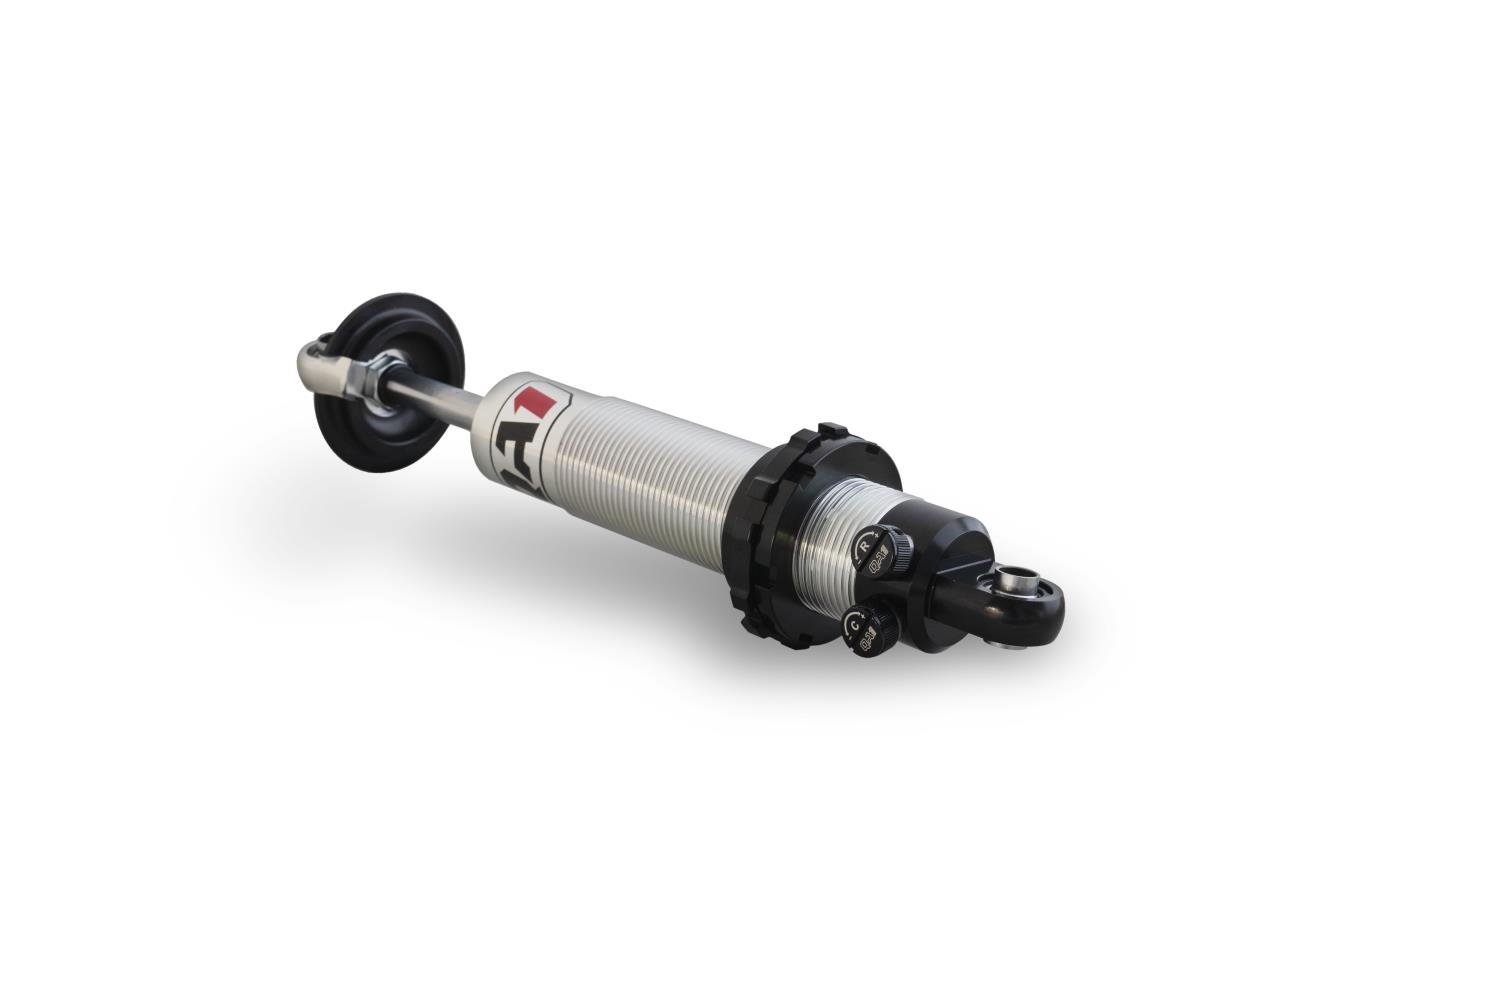 Double Adjustable Shock Compressed Height: 11-5/8"